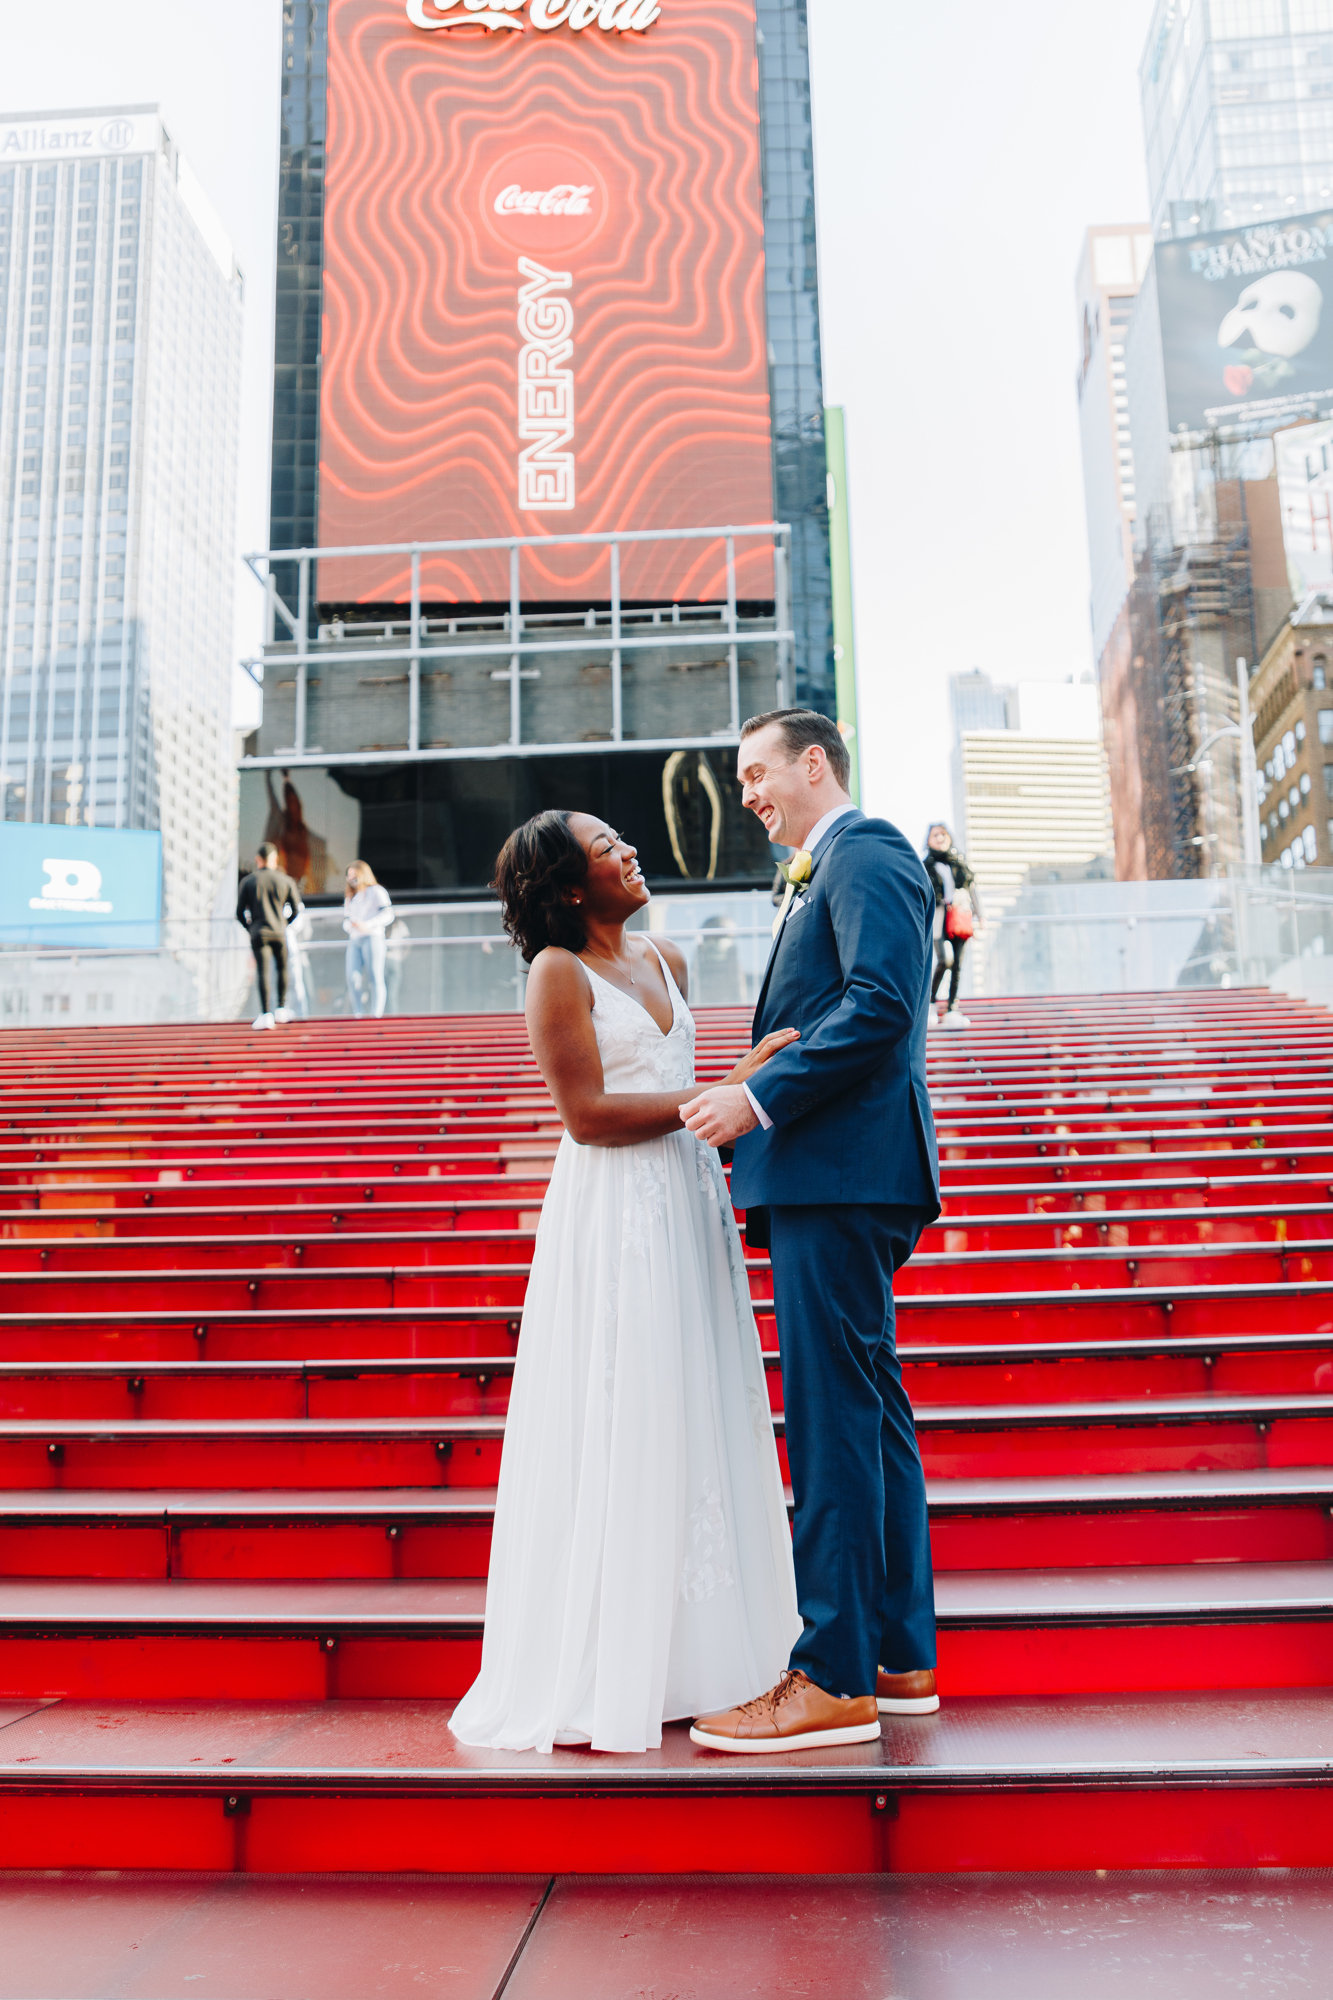 Morning Times Square Wedding Photos in NYC